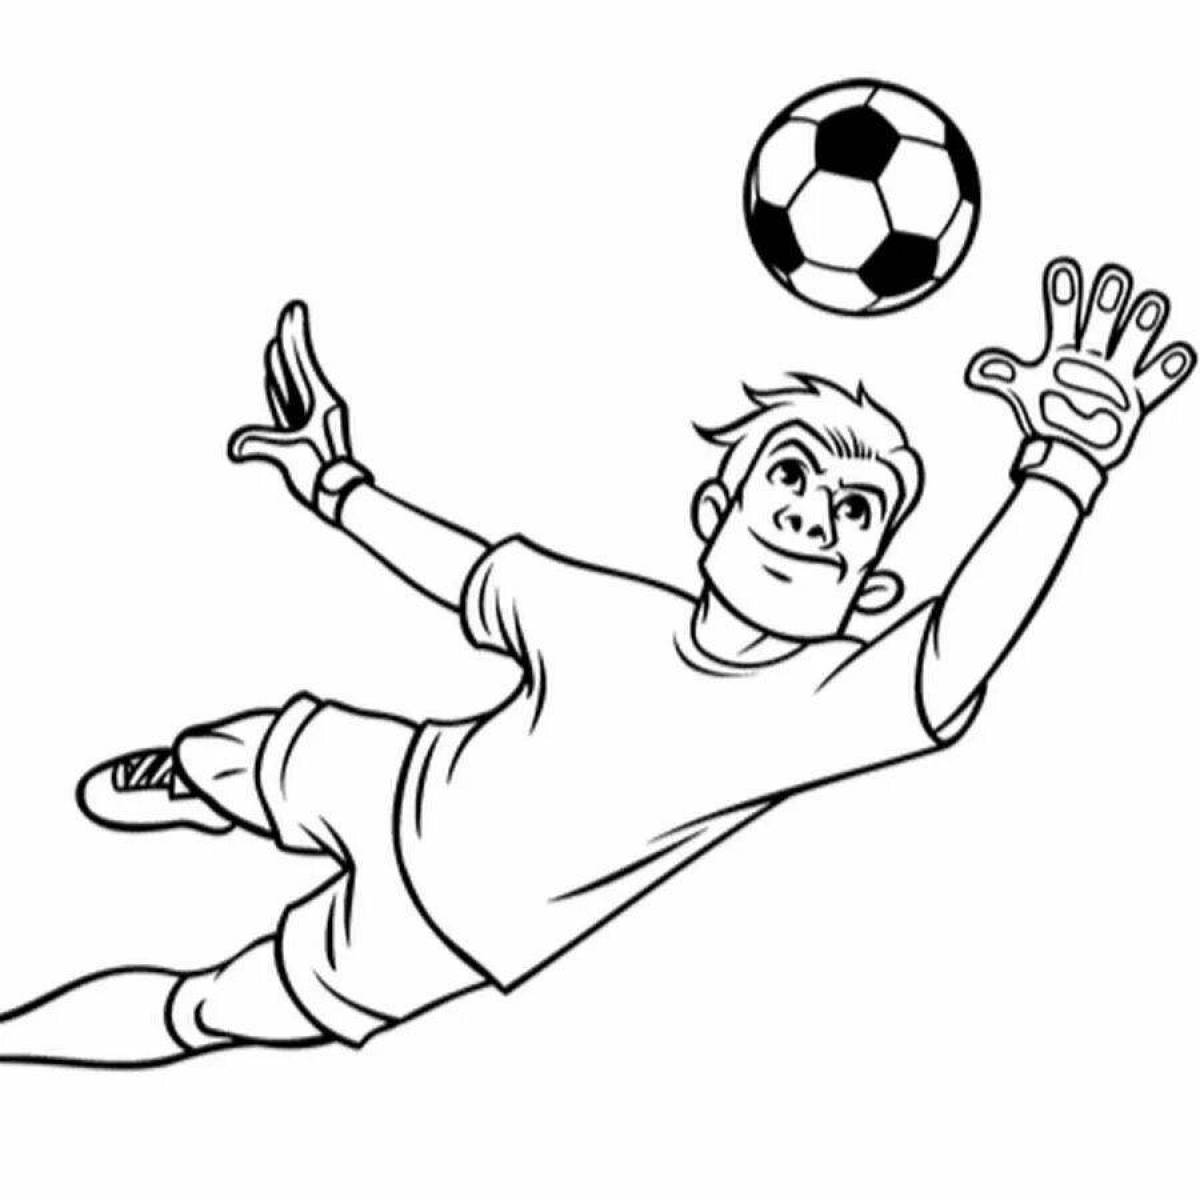 Decisive soccer player with ball